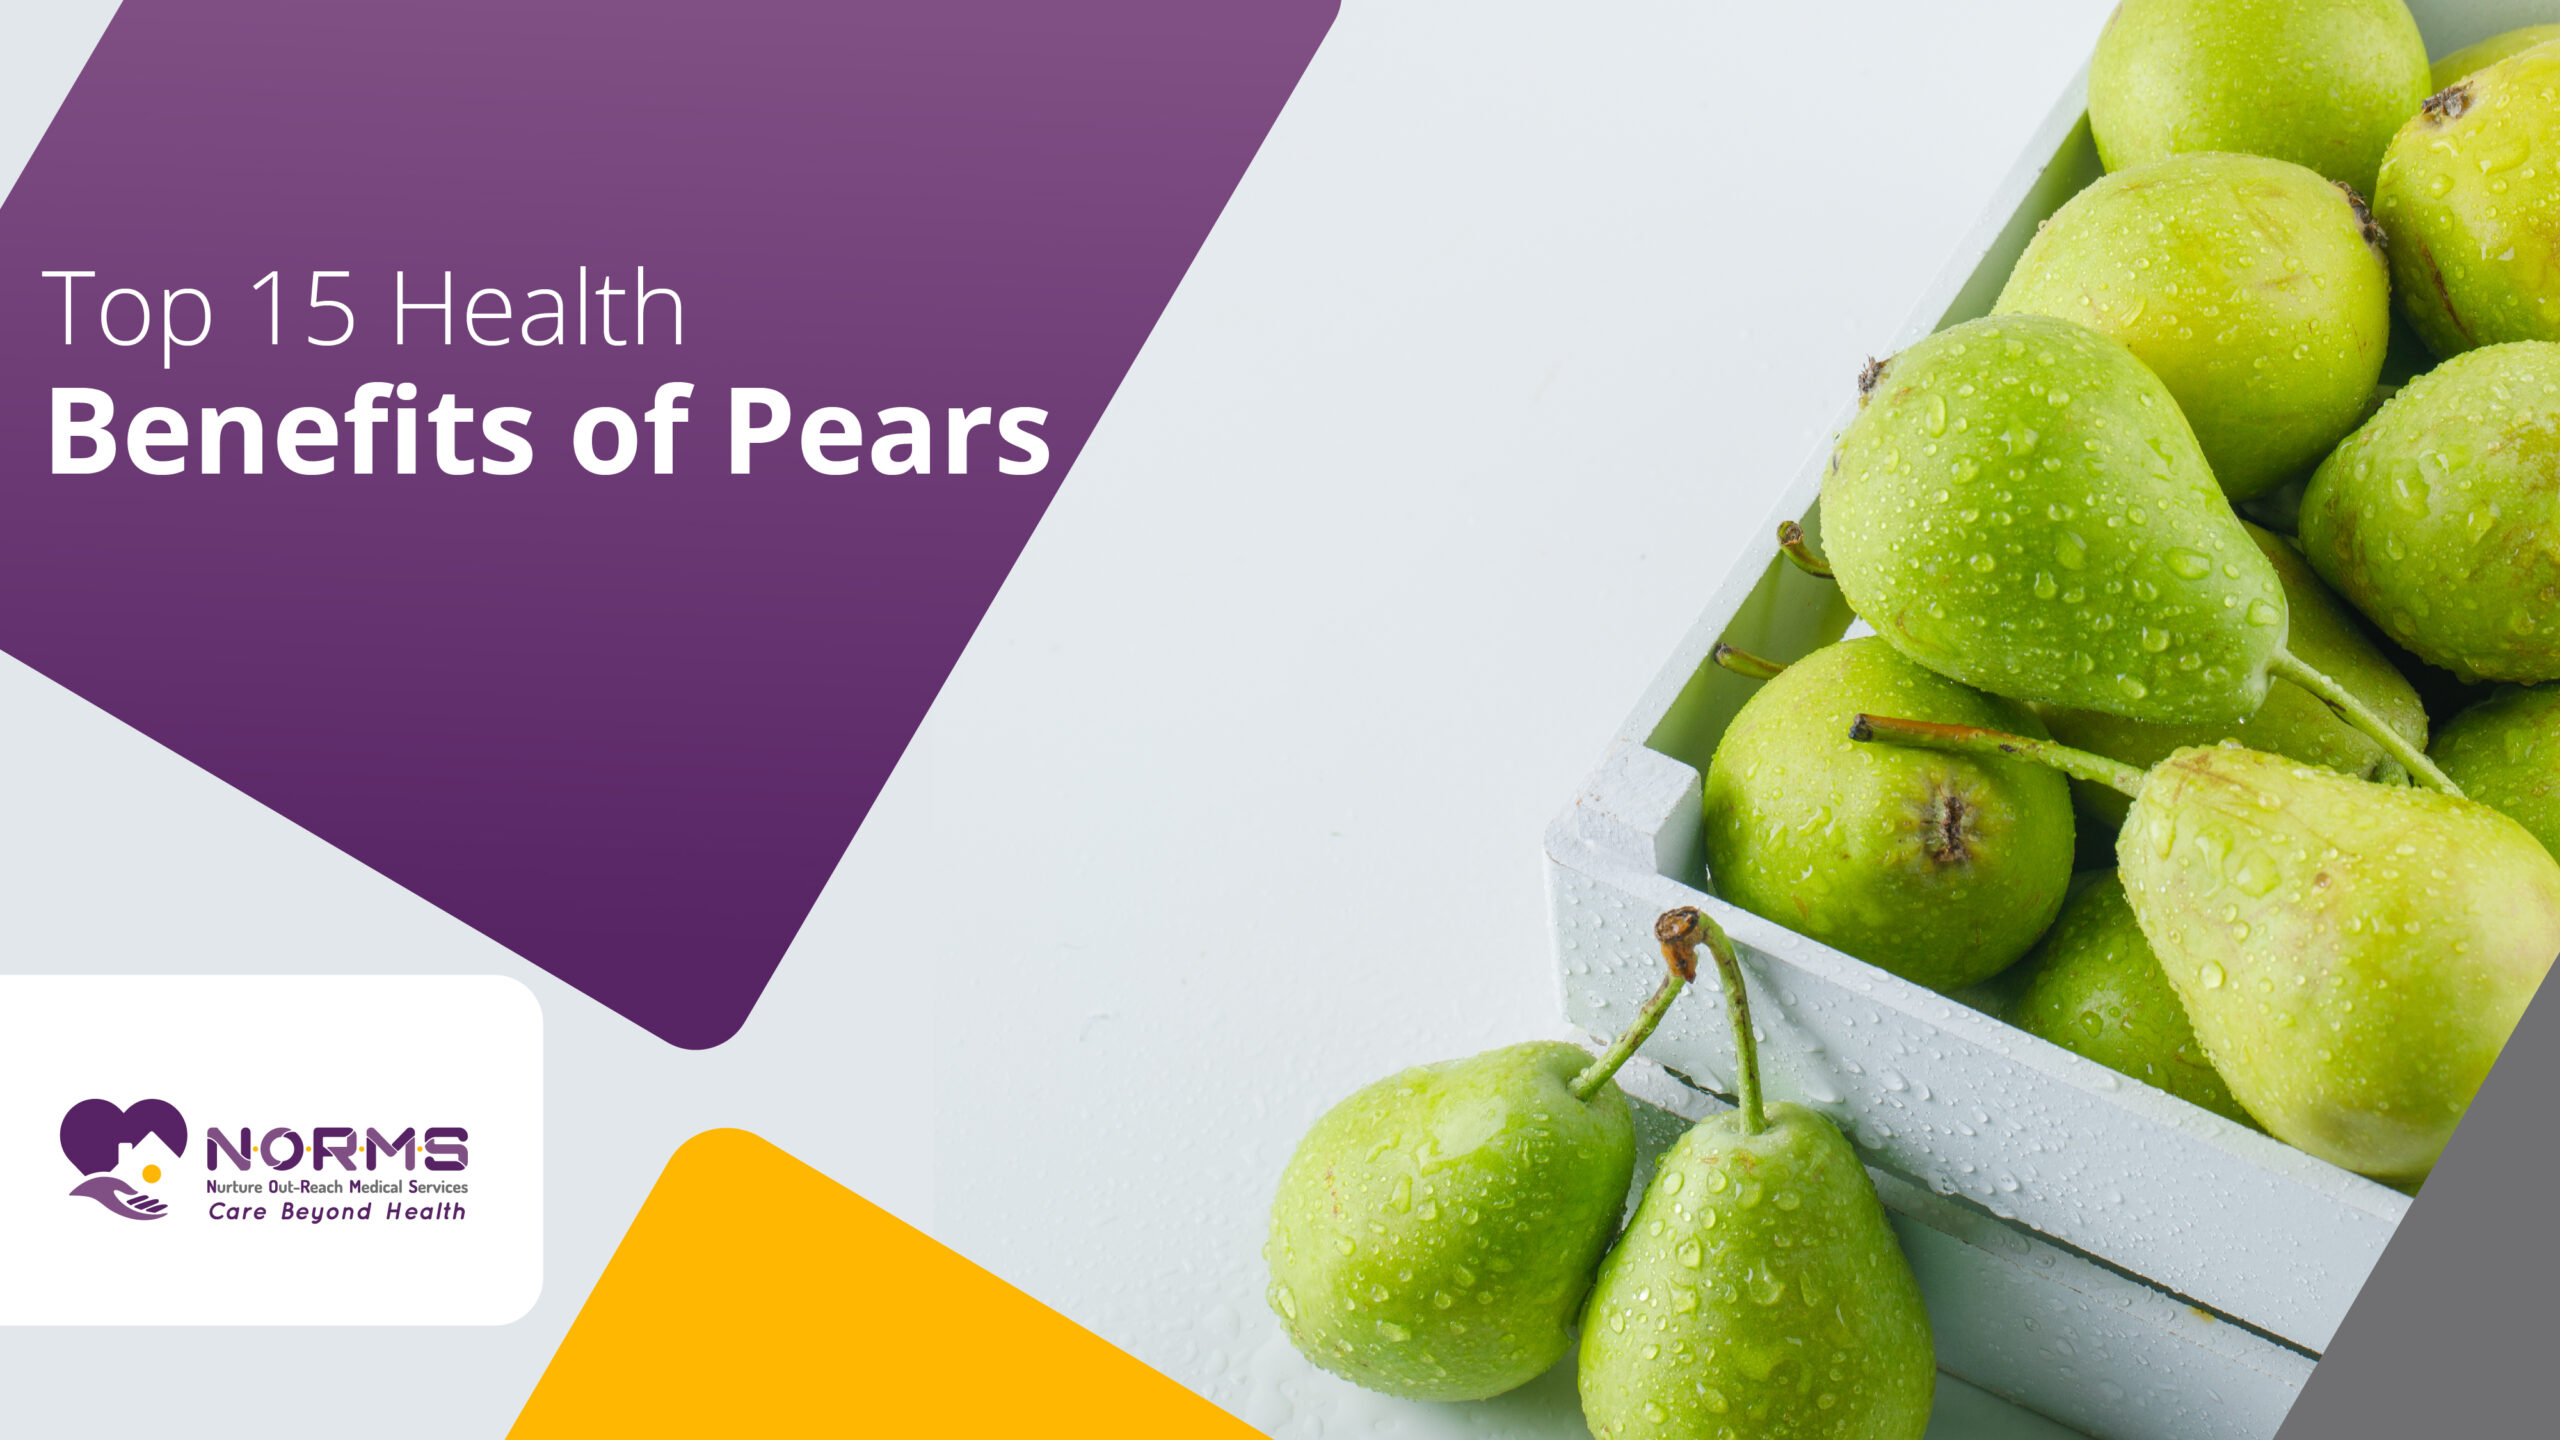 Top Health Benefits of Pears